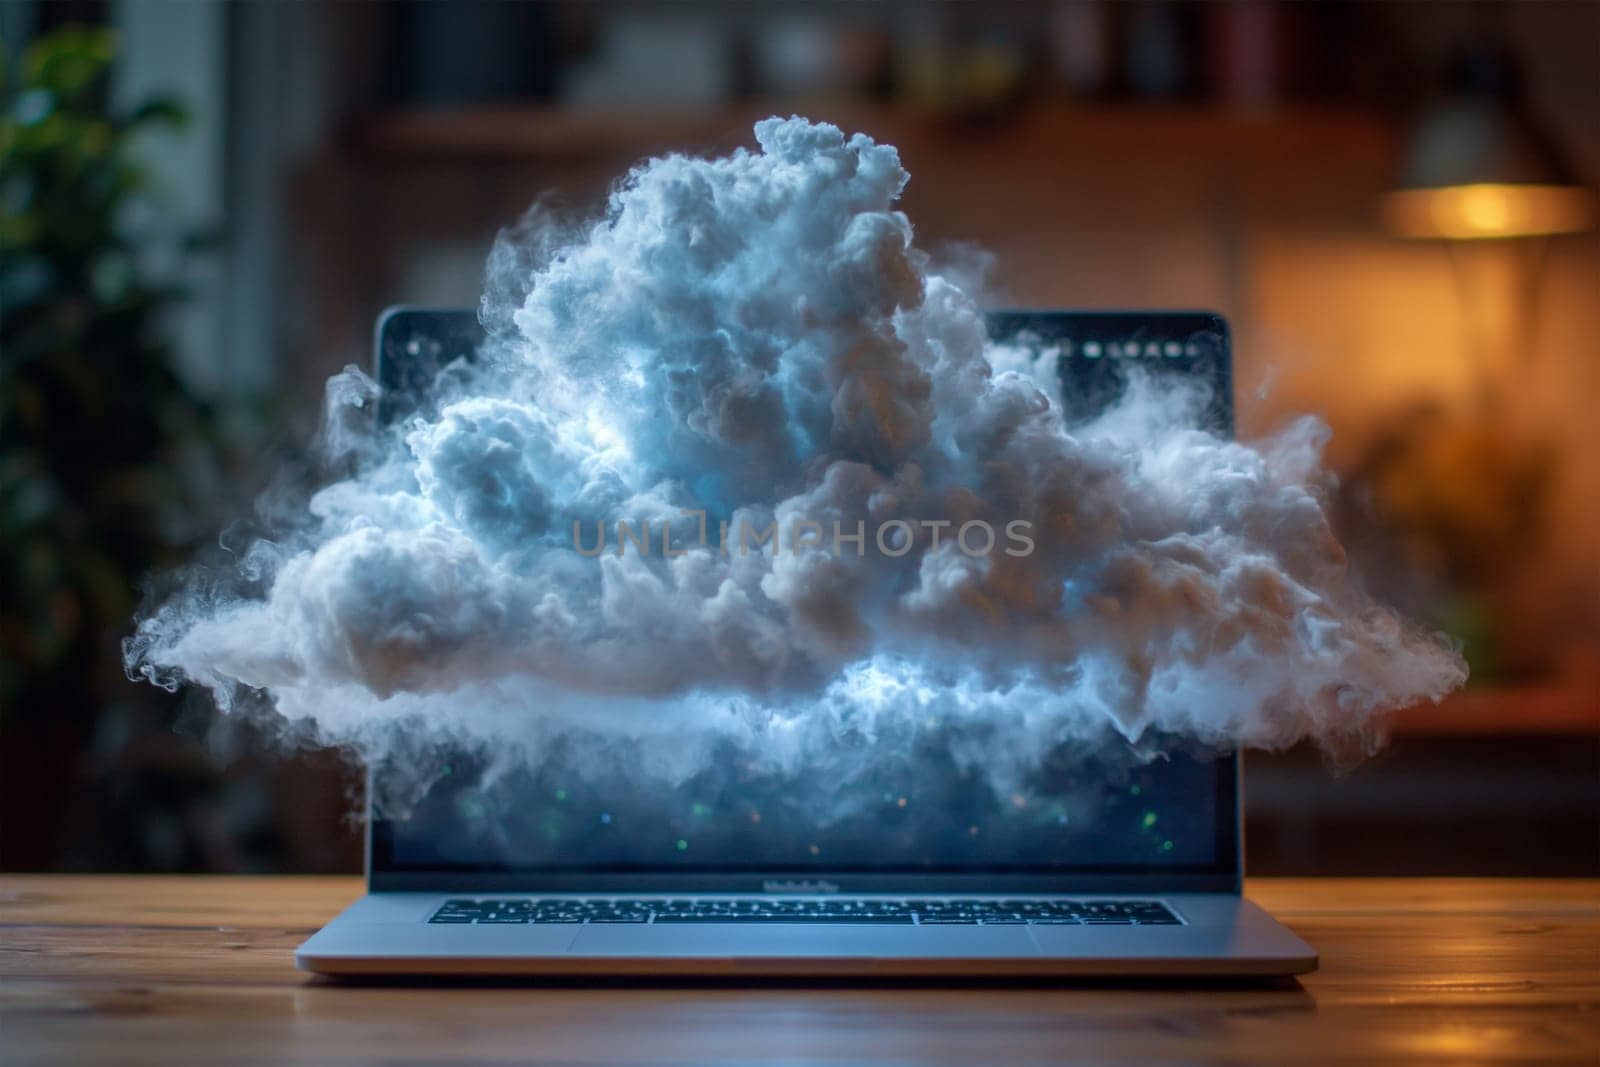 Thunderclouds fly over the laptop.